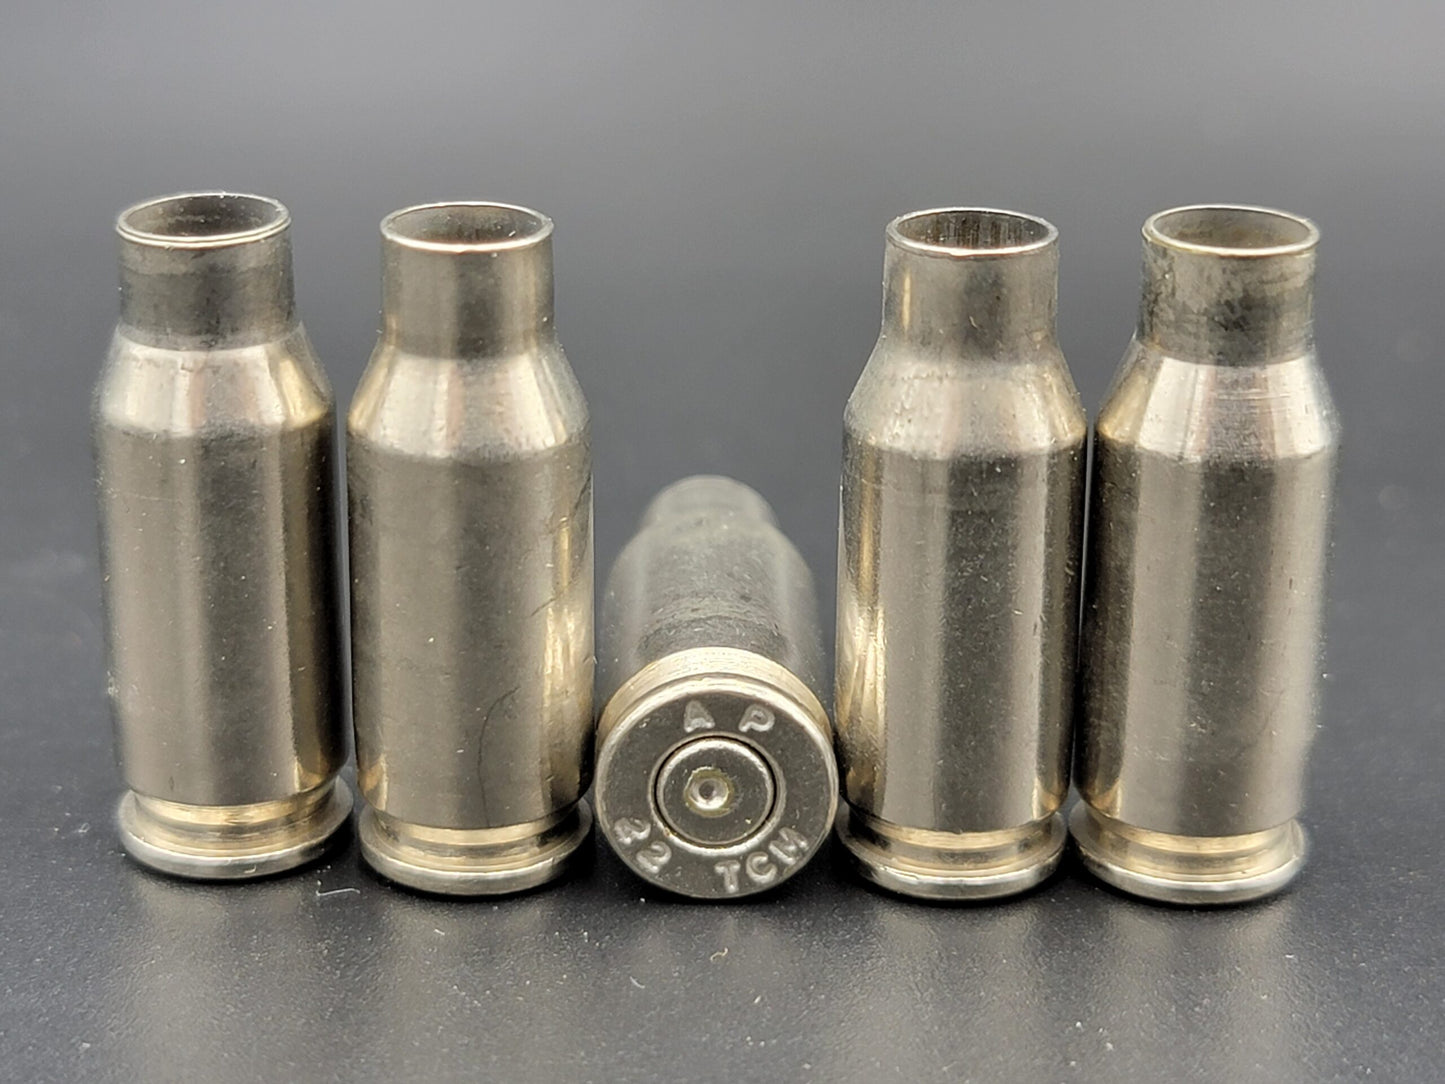 22 TCM once fired rifle nickel. Hand sorted from reputable indoor/military ranges for reloading. Reliable spent casings for precision shooting.